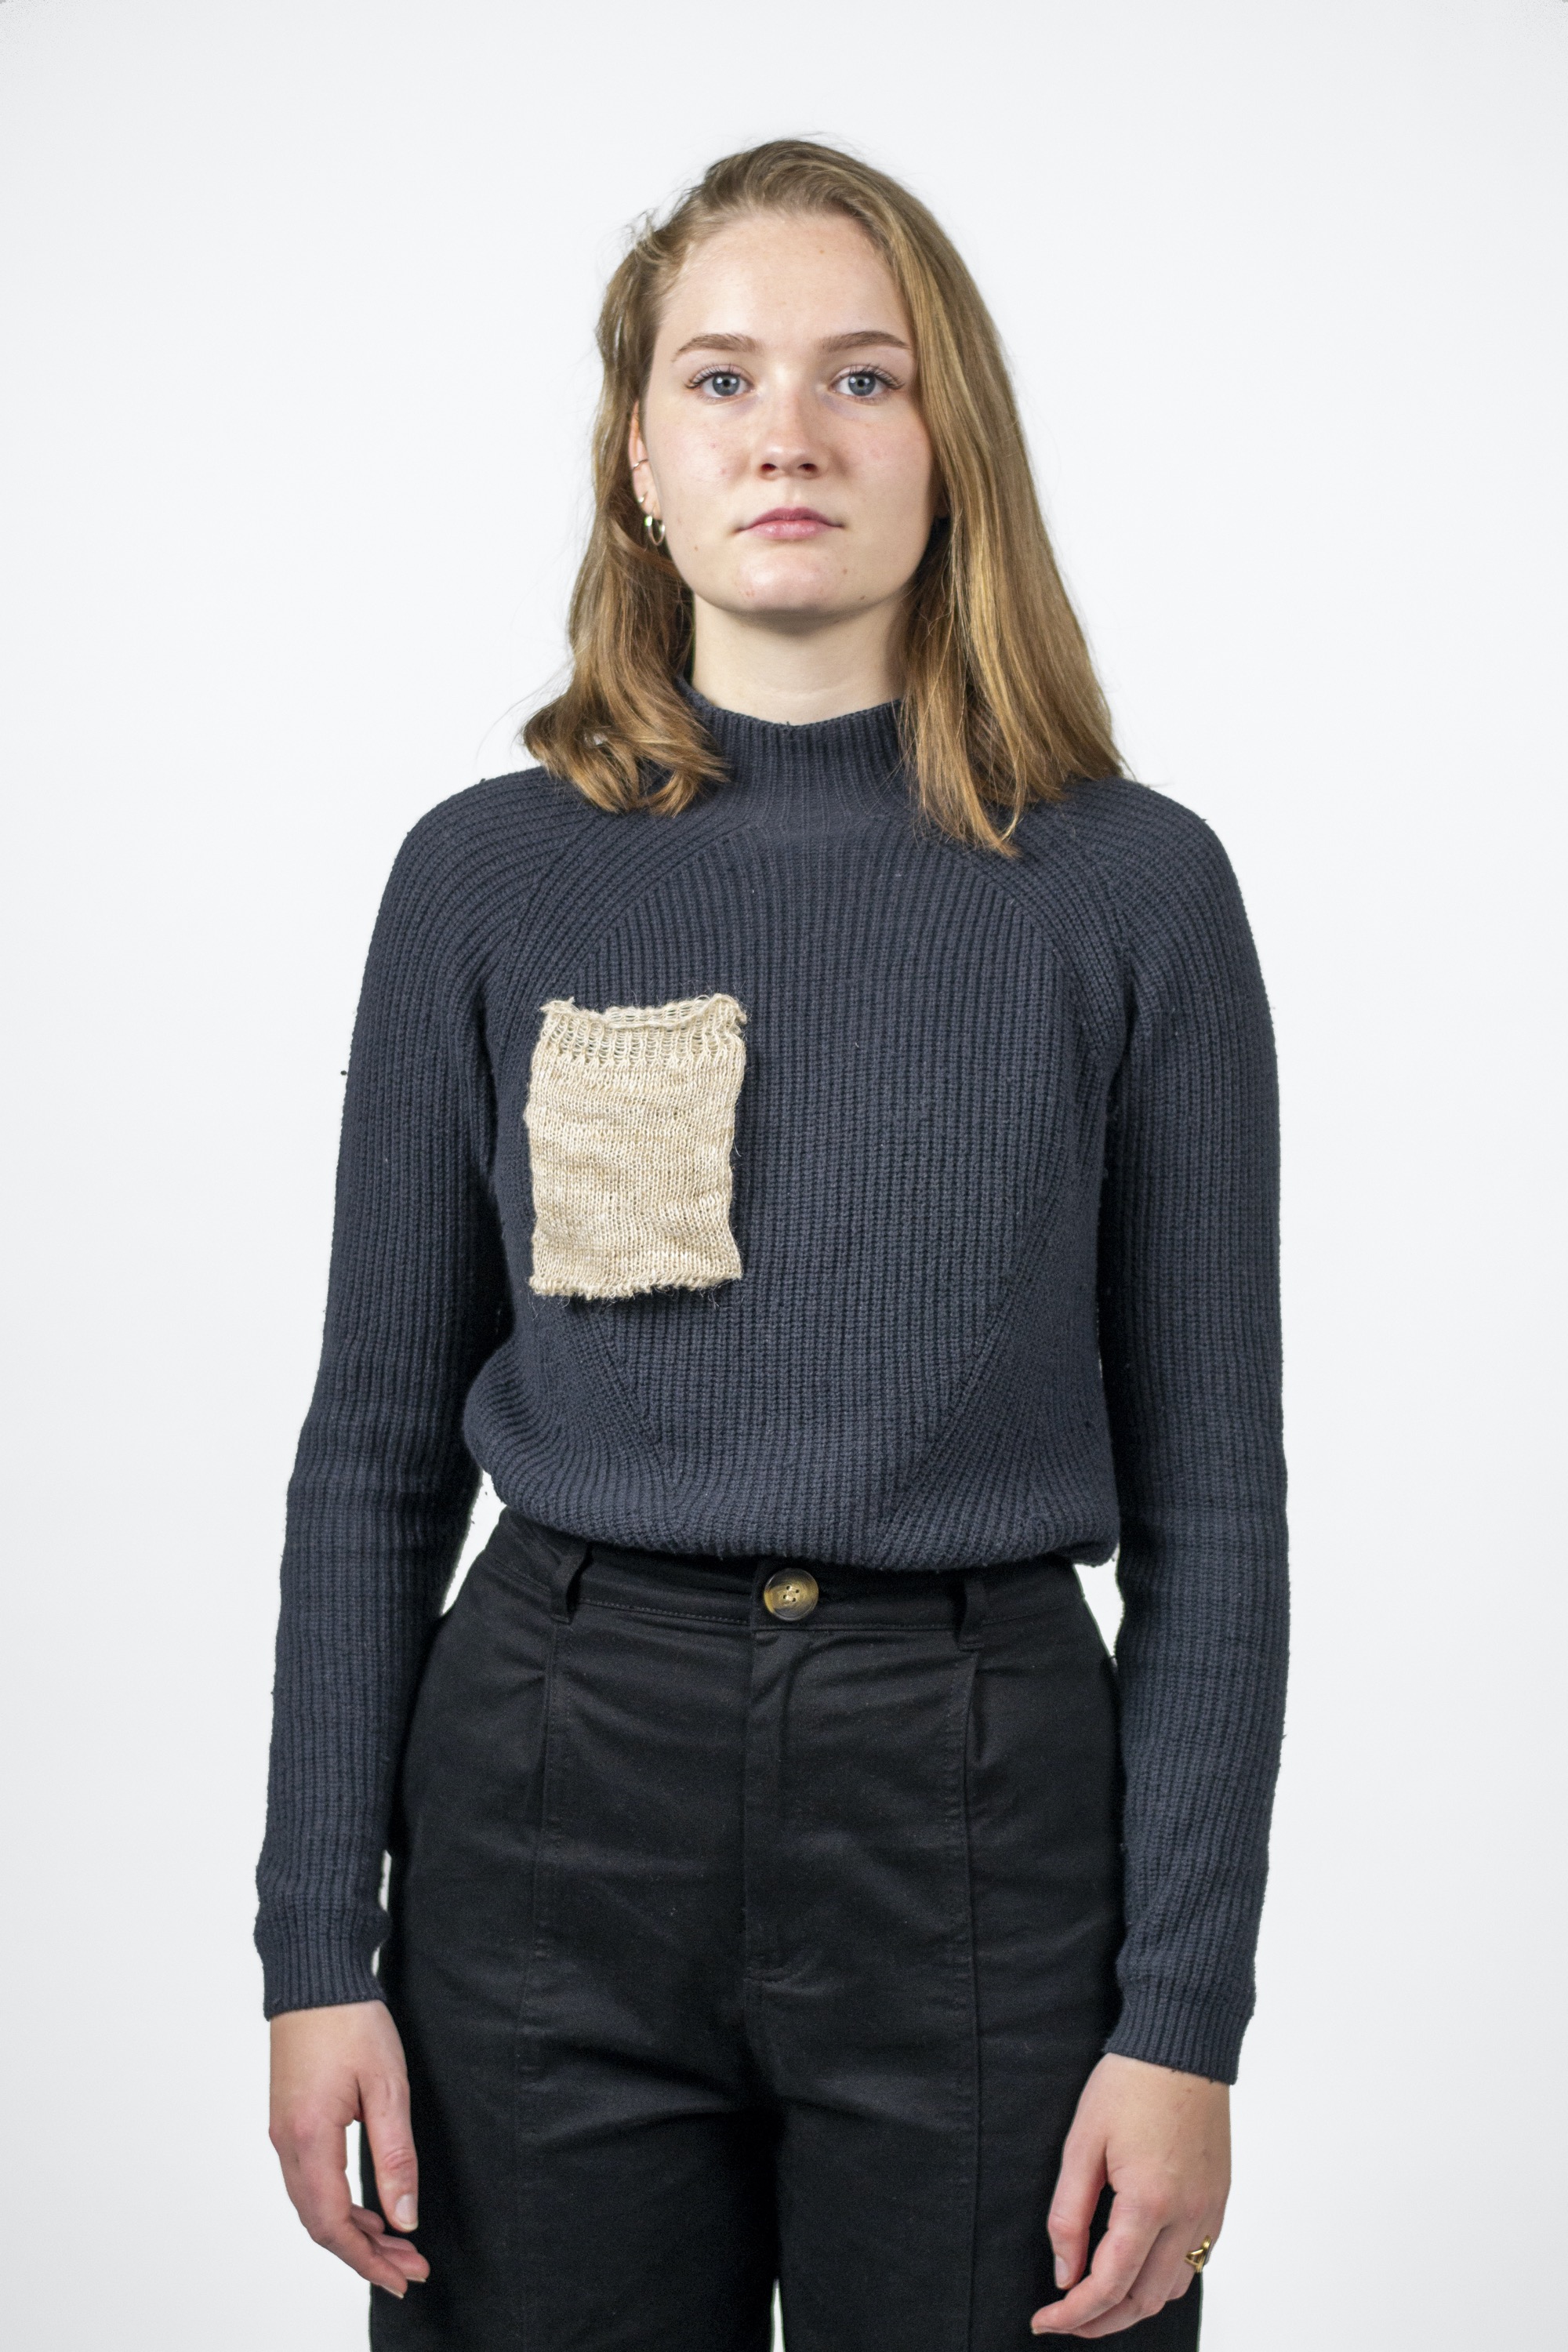 A model wearing repaired jumper